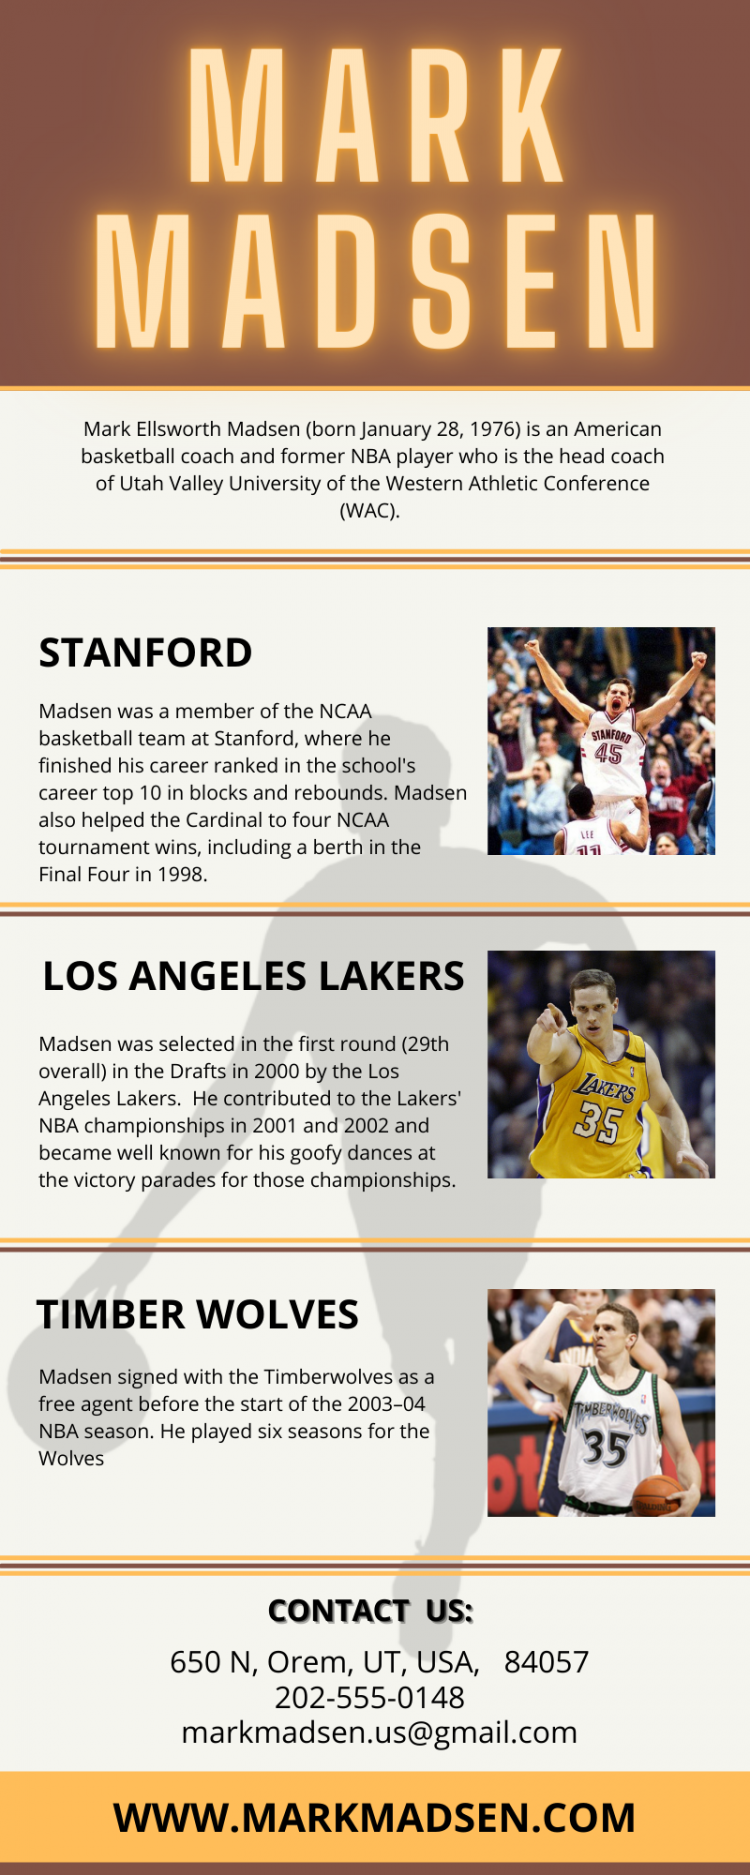 Mark Madsen is an American basketball coach and former NBA player who is the head coach of Utah Valley University of the Western Athletic Conference (WAC). Prior to joining Utah Valley, Madsen spent six seasons as an assistant coach with the Los Angeles Lakers.  During those six seasons, Madsen coached Kobe Bryant, Pau Gasol, LeBron James, Steve Nash and many others. https://markmadsen.com